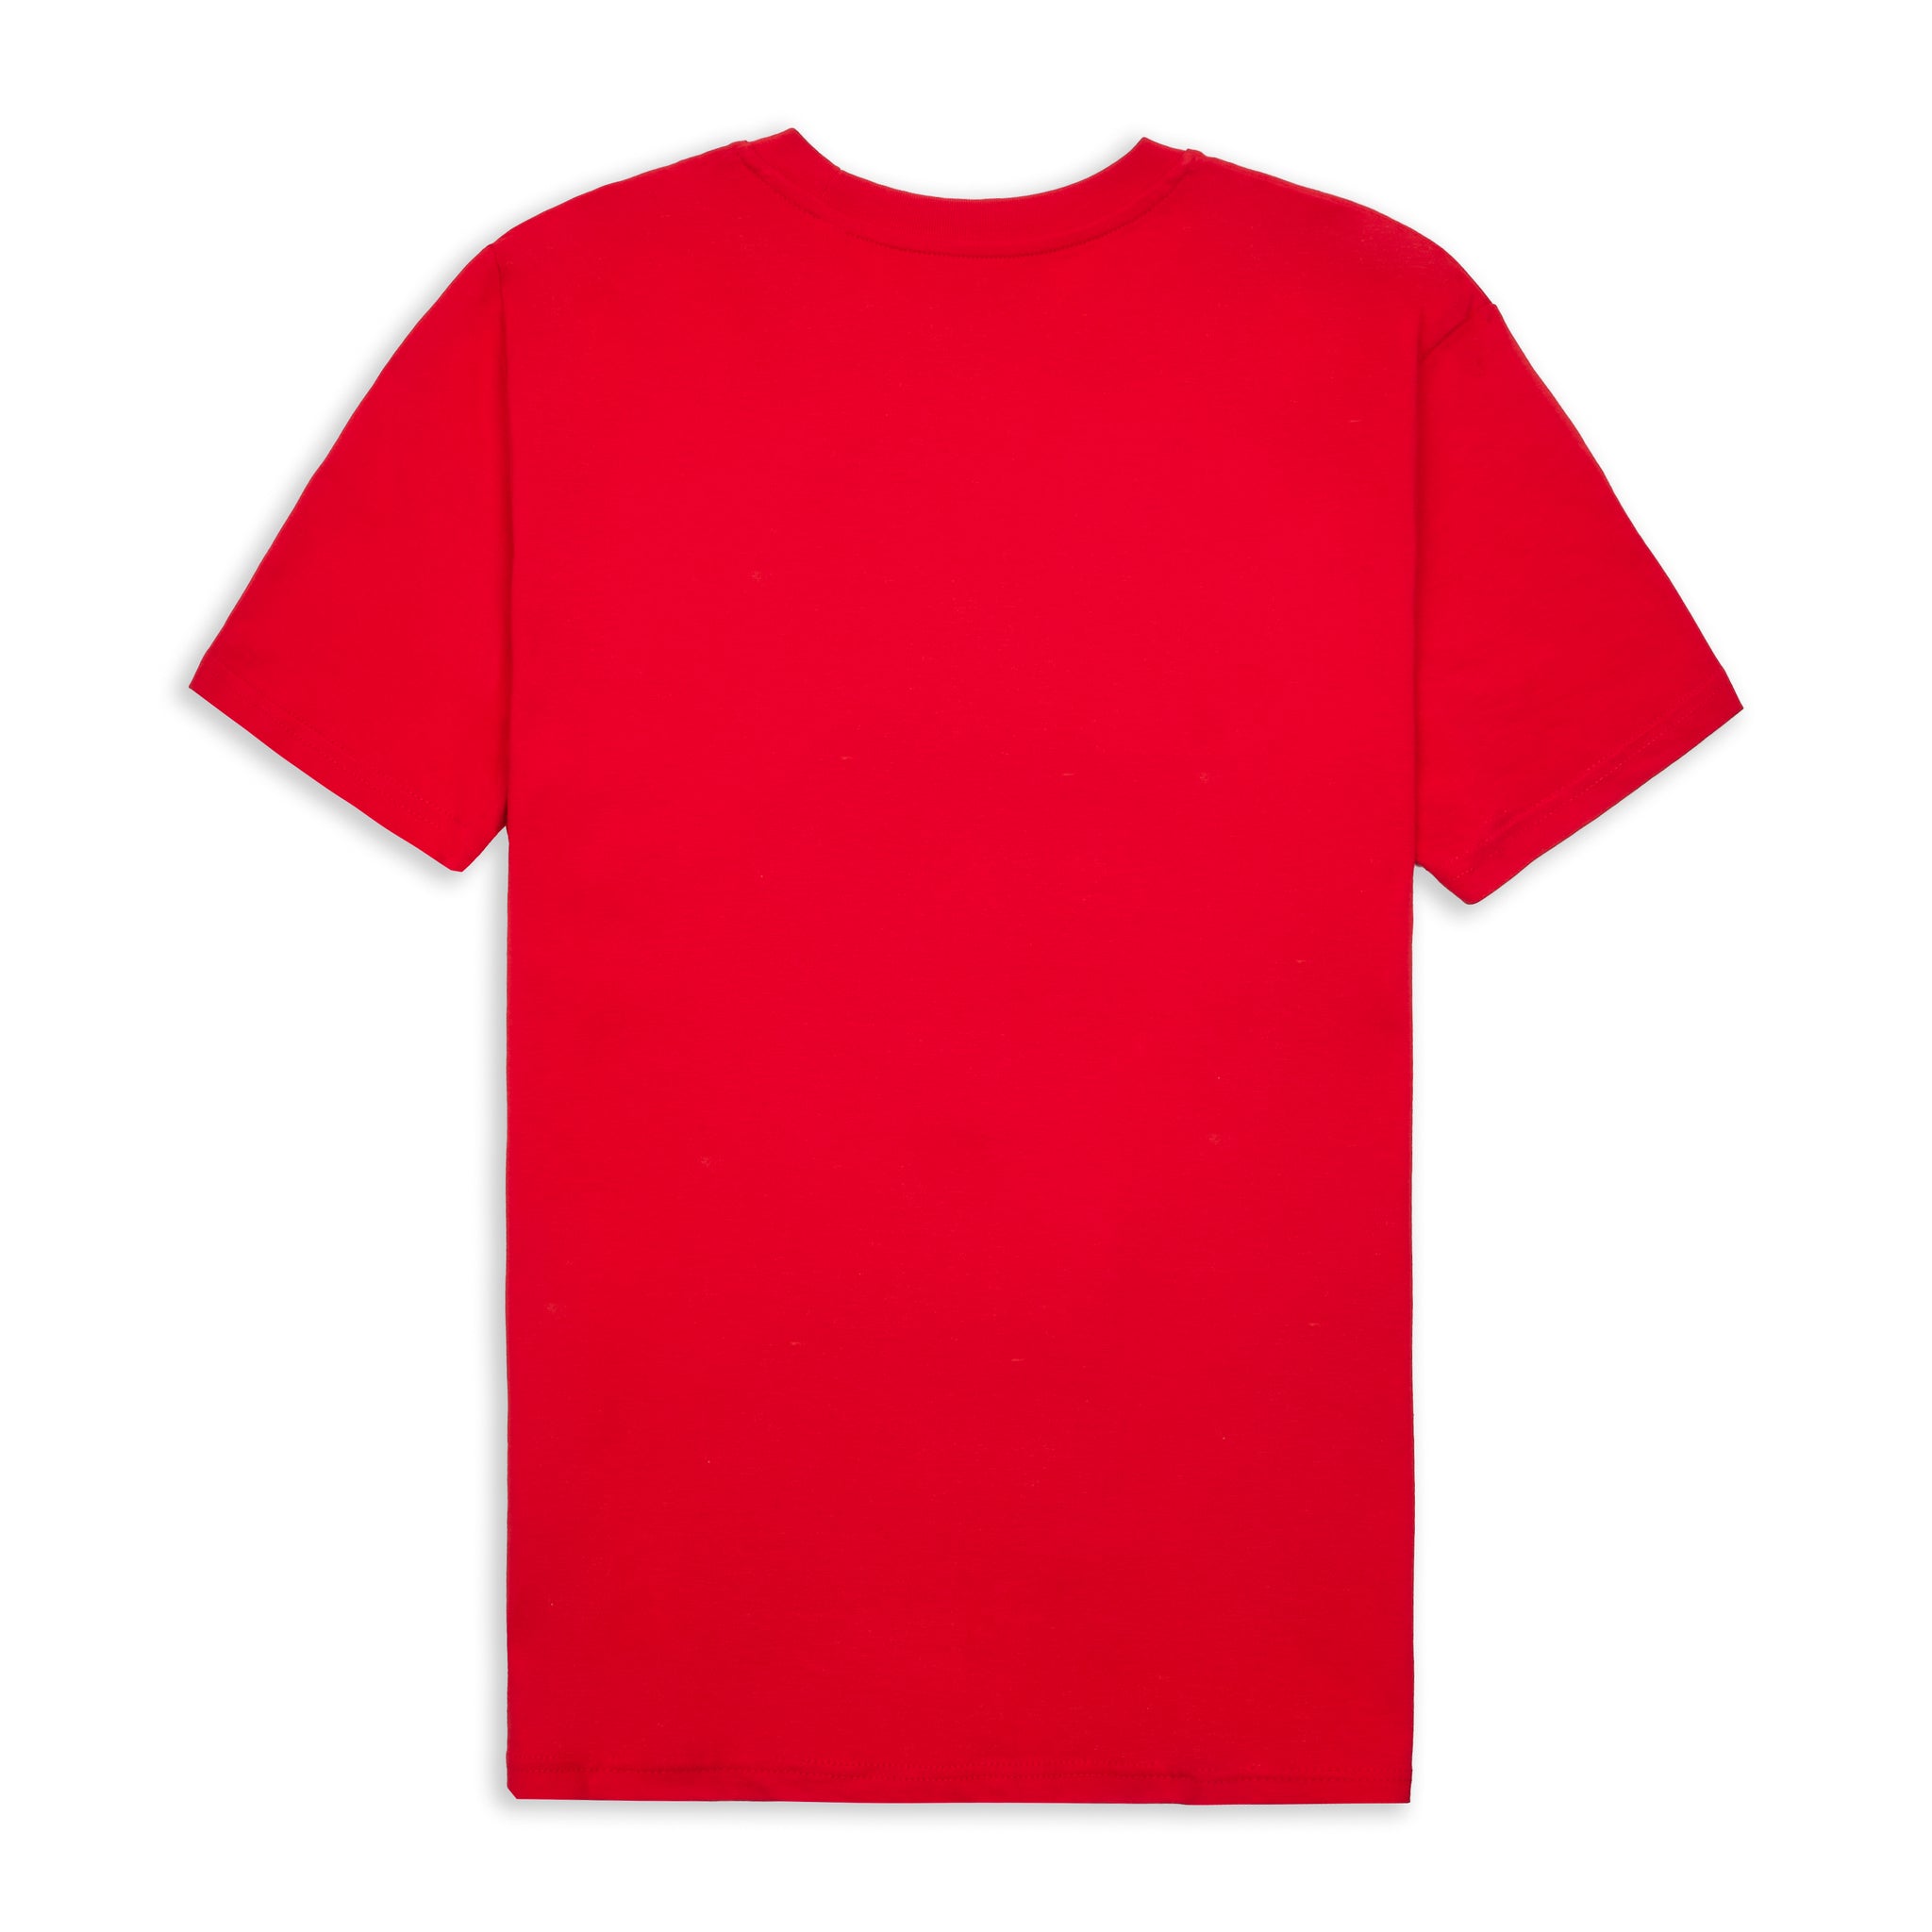 Red 30 Year Clothing 30 Year™ T-Shirt